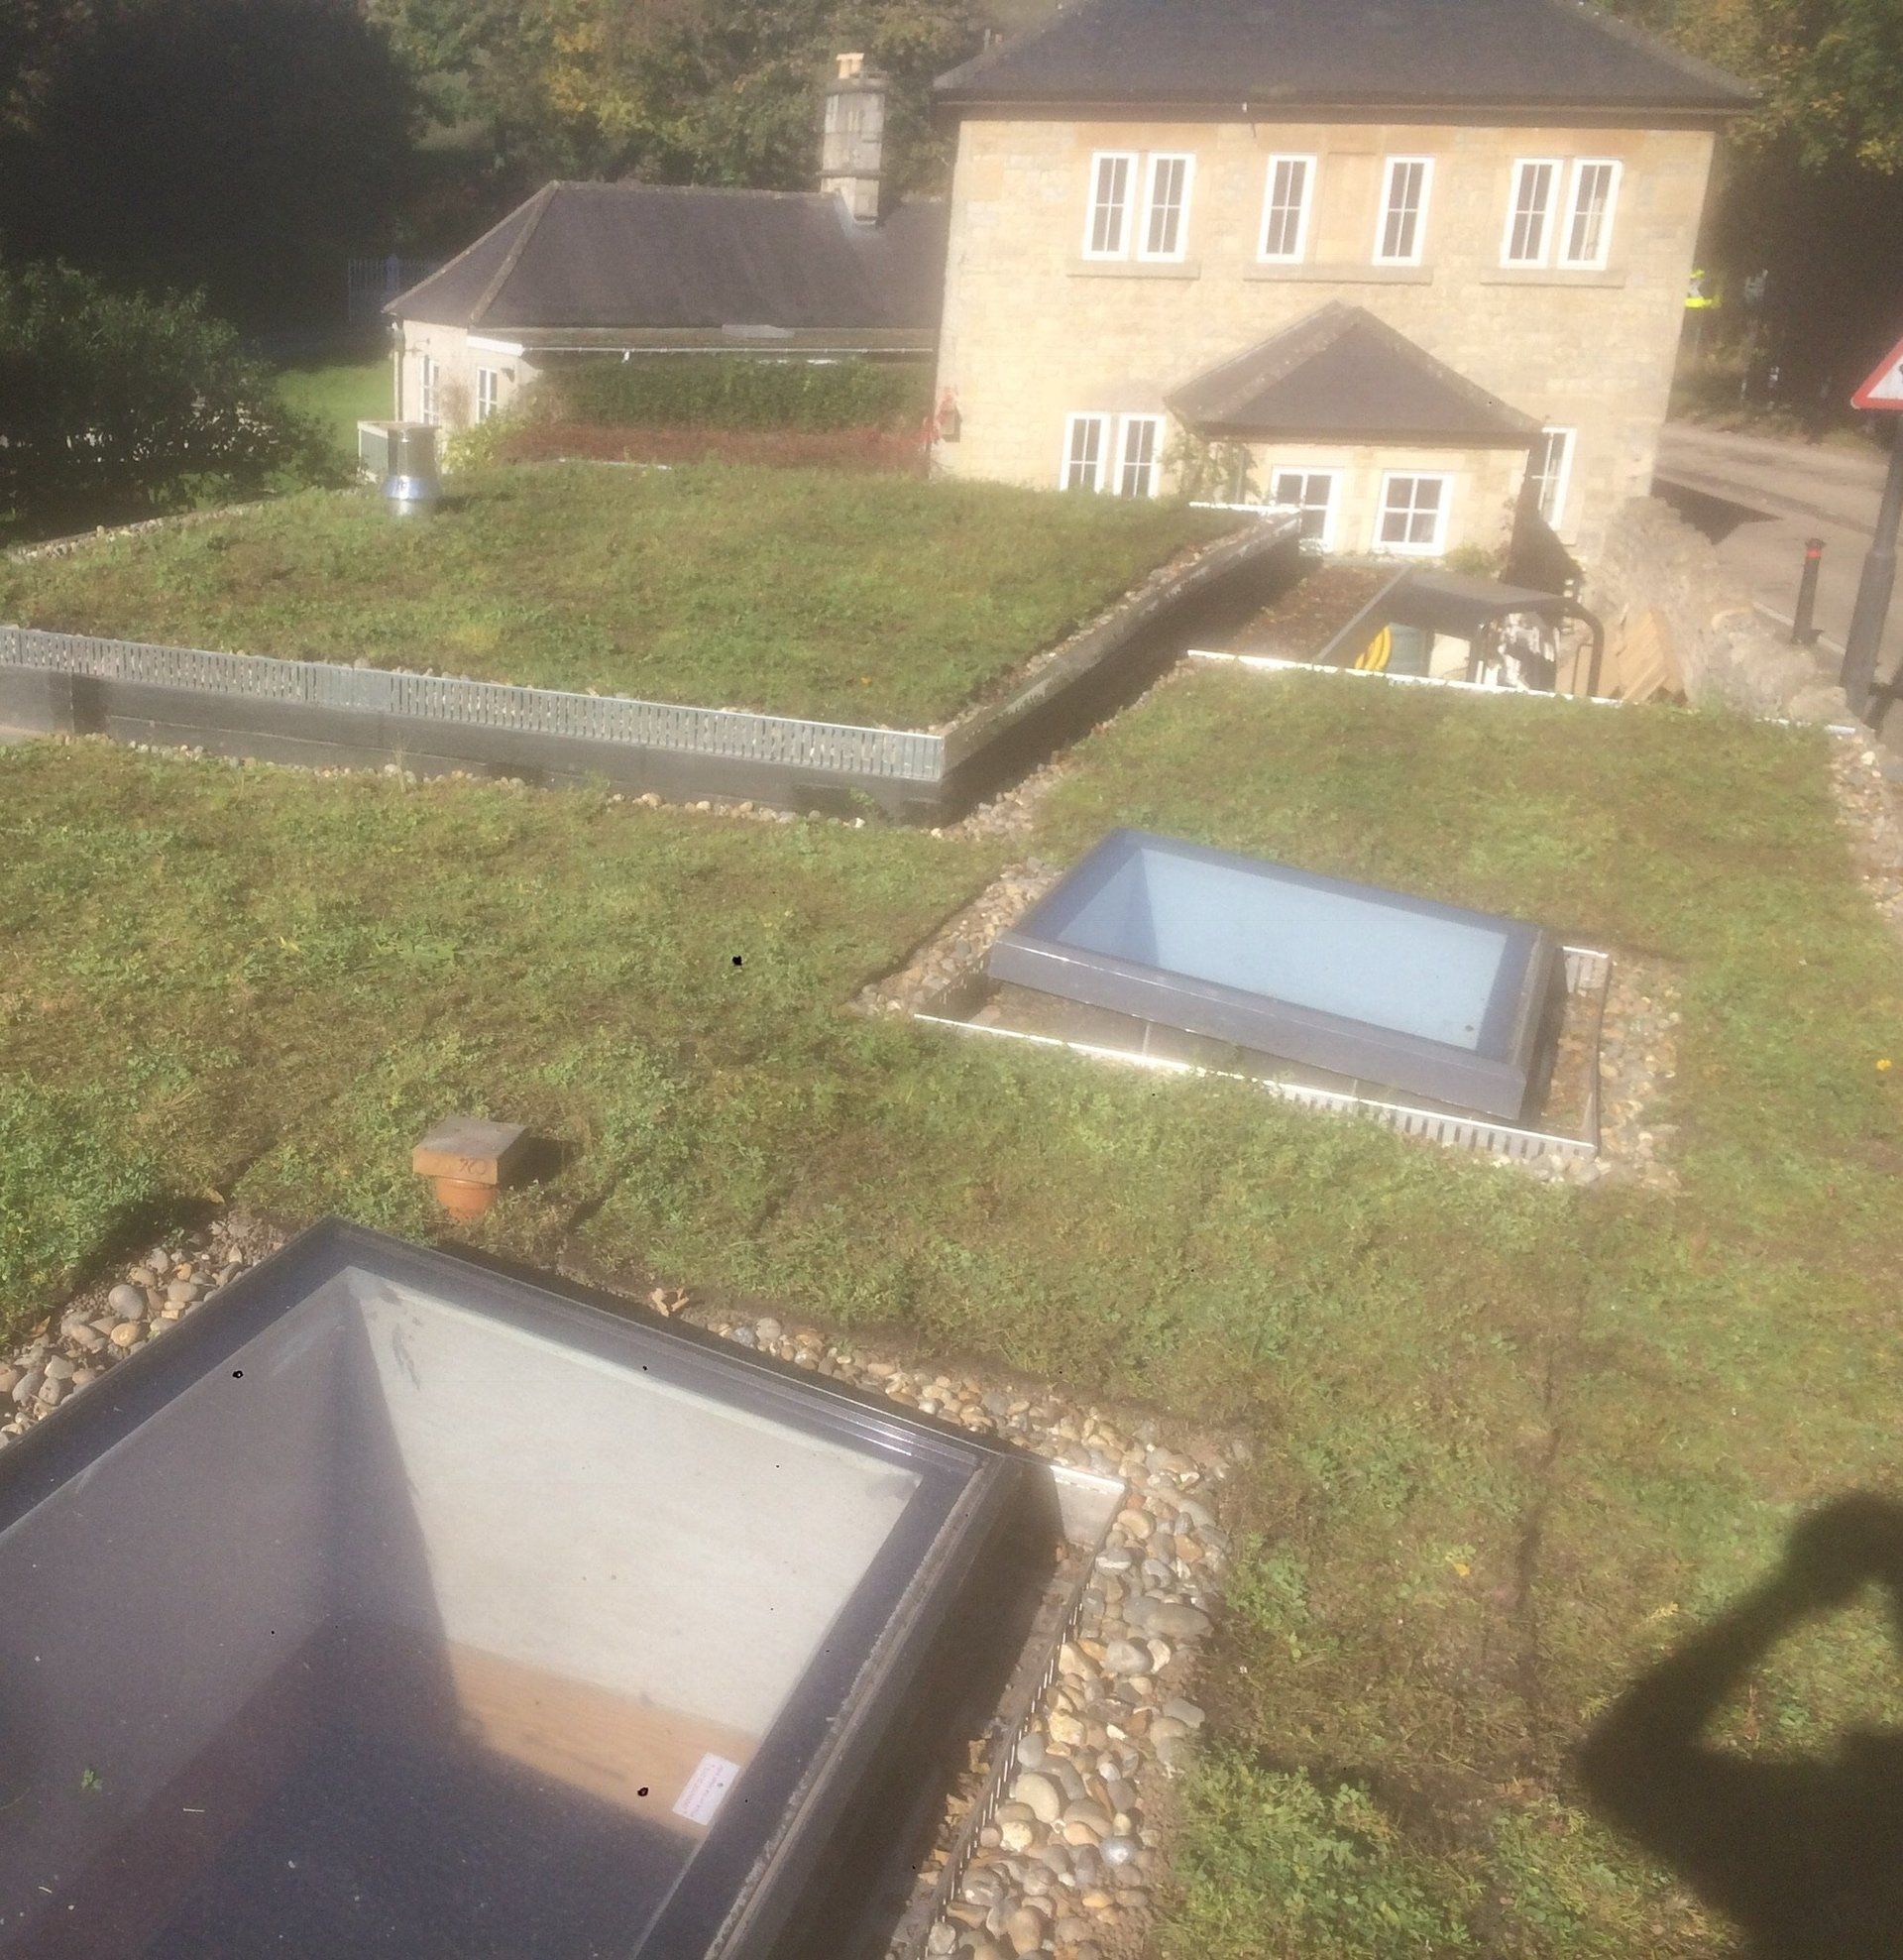 'living'flat roof with windows